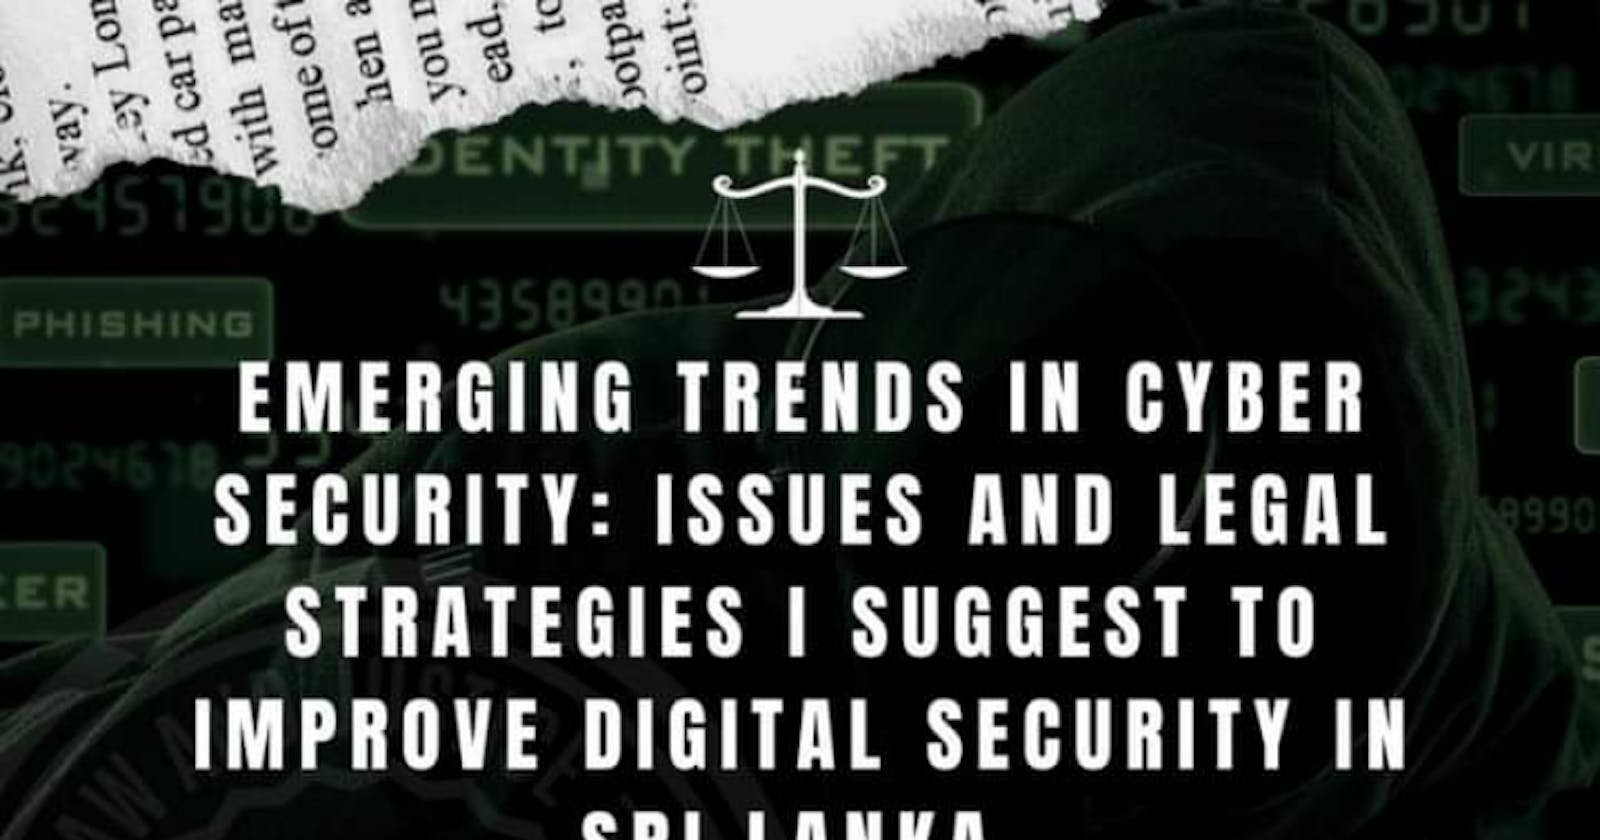 Emerging Trends in Cyber Security: Issues and Legal Strategies I Suggest to Improve Digital Security in Sri Lanka.